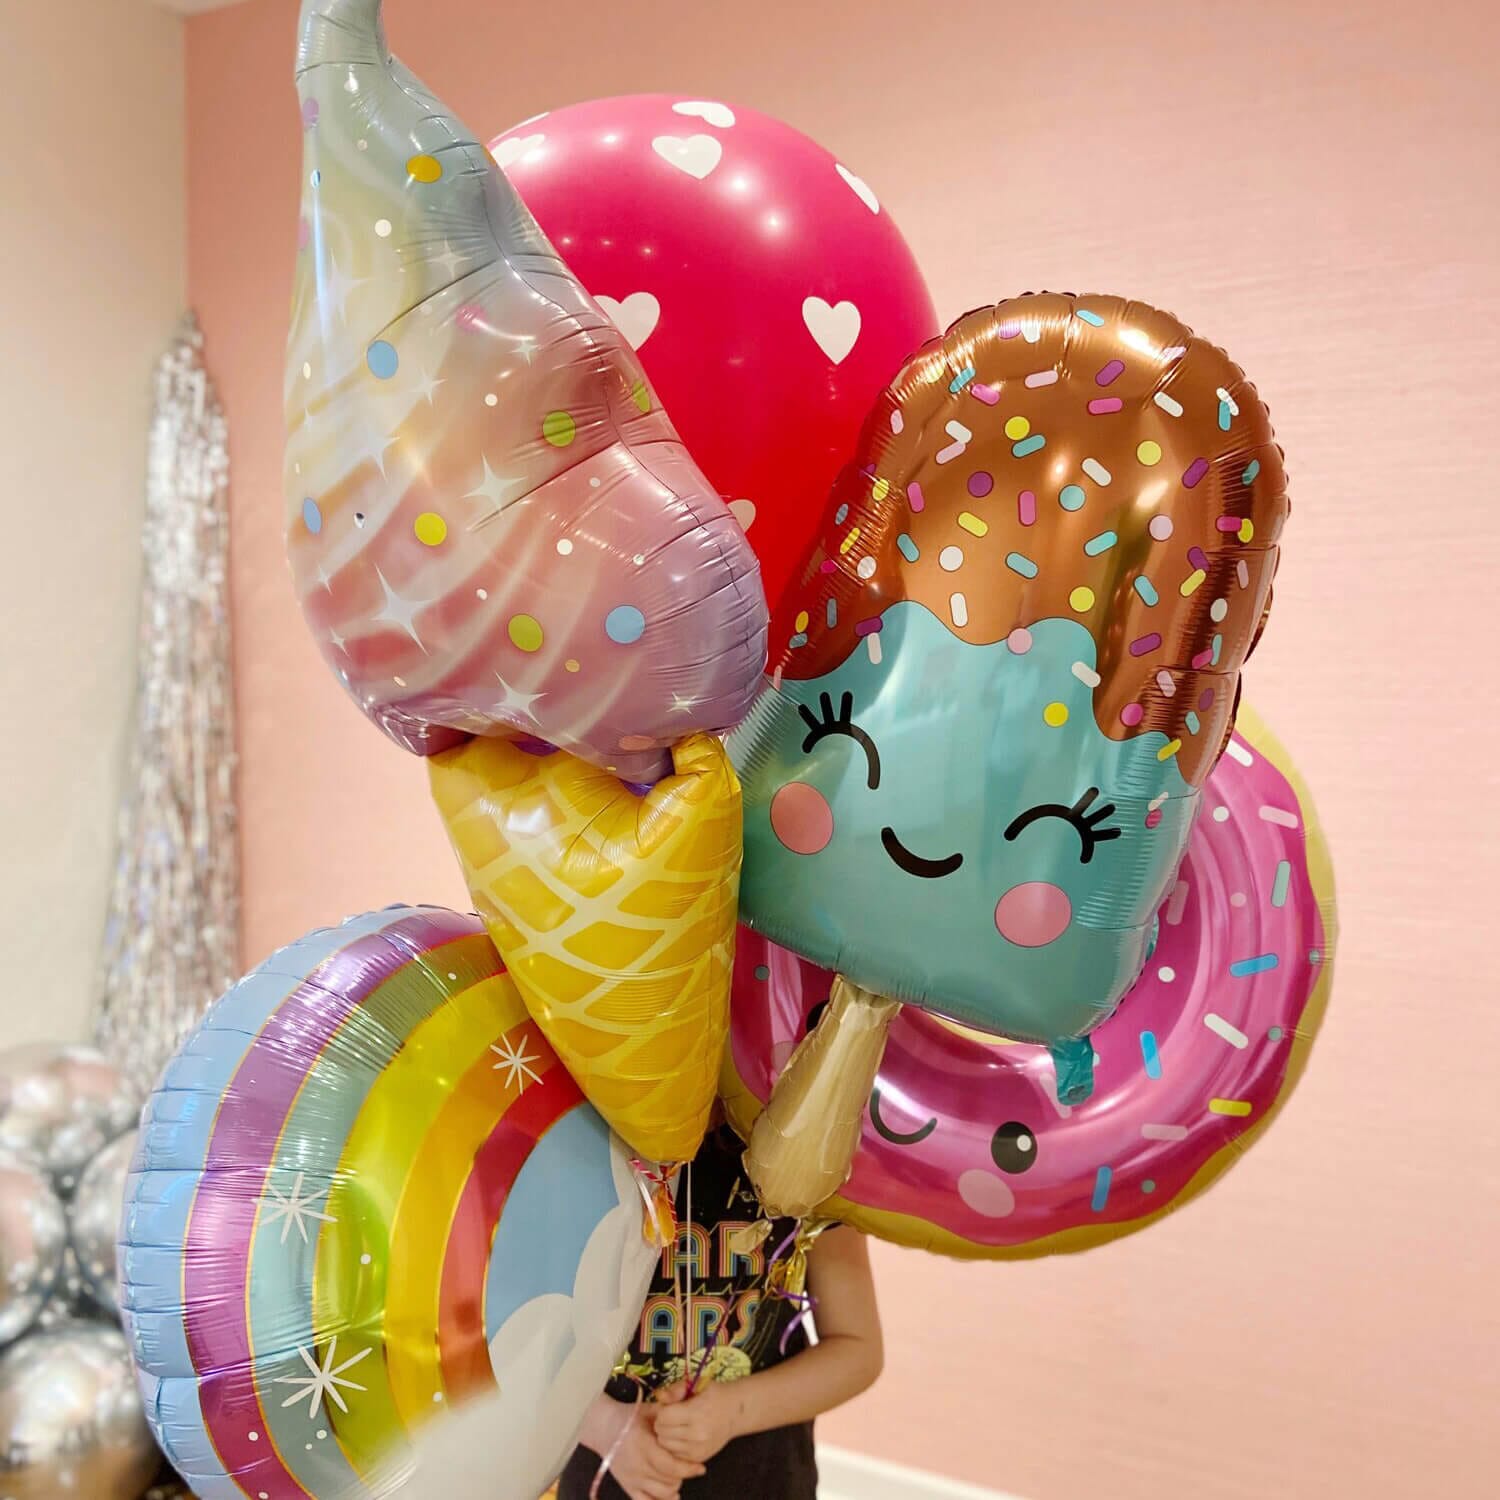 Just Peachy makes oversized helium bouquets like this one with ice cream, donut, rainbow, and popsicle balloons.